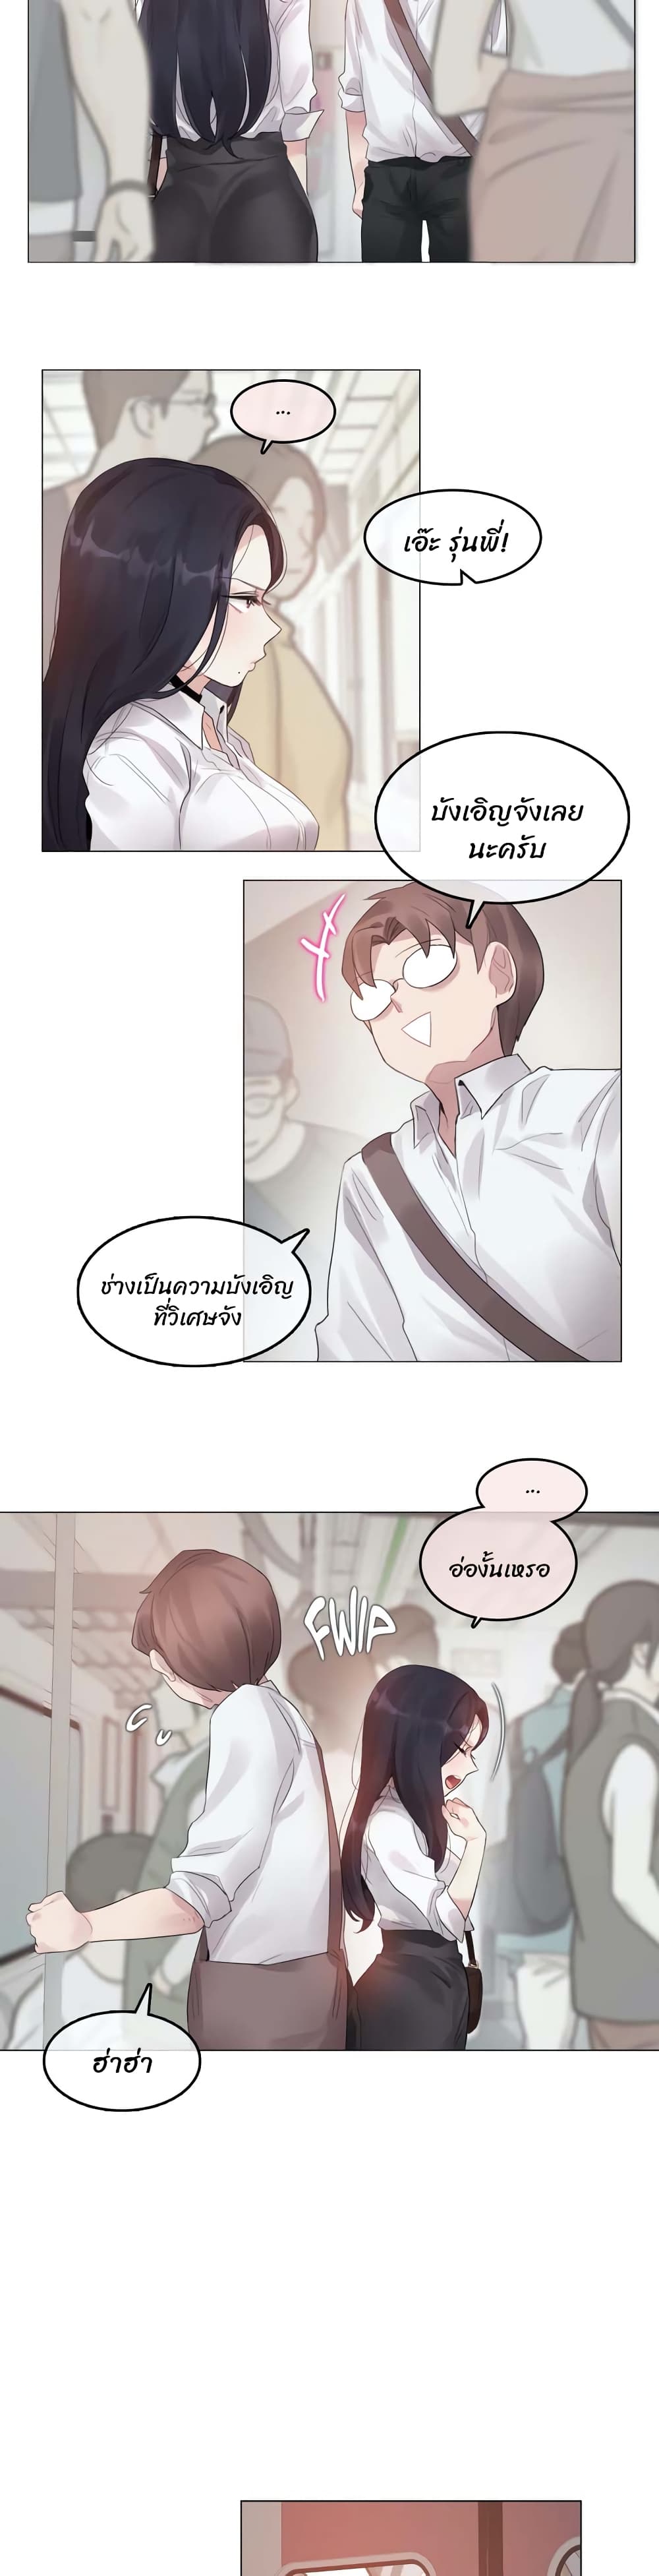 A Pervert's Daily Life 98 (8)